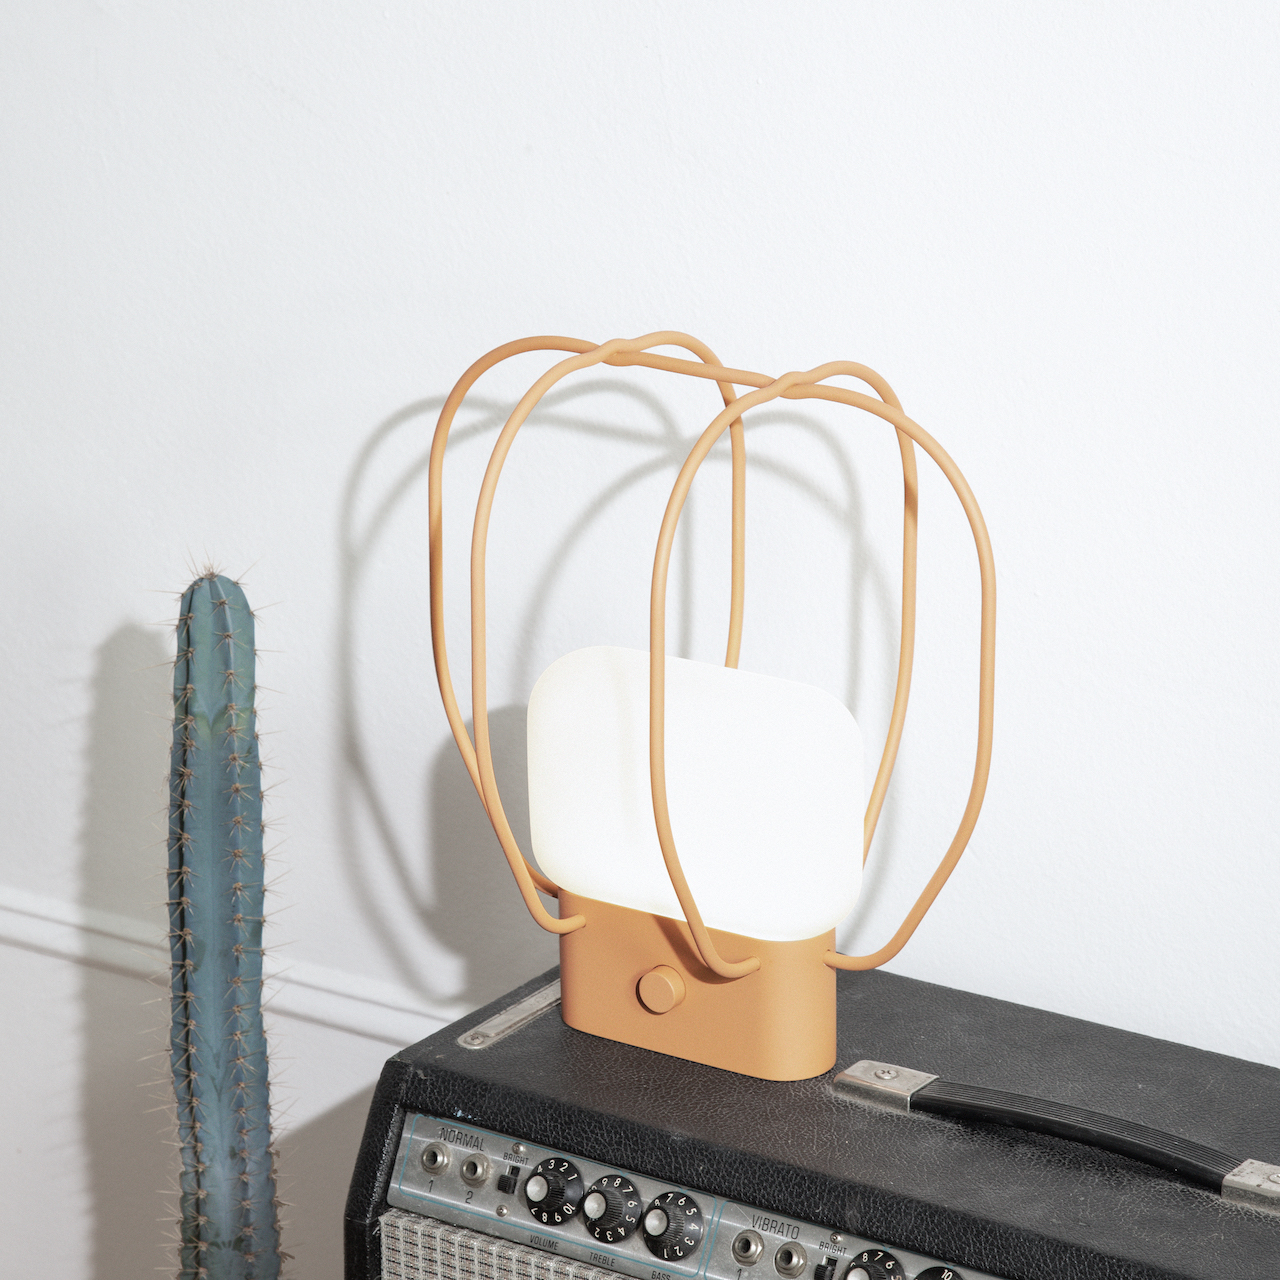 A-OKAY Takes Shop Lights From Industrious to Contemporary